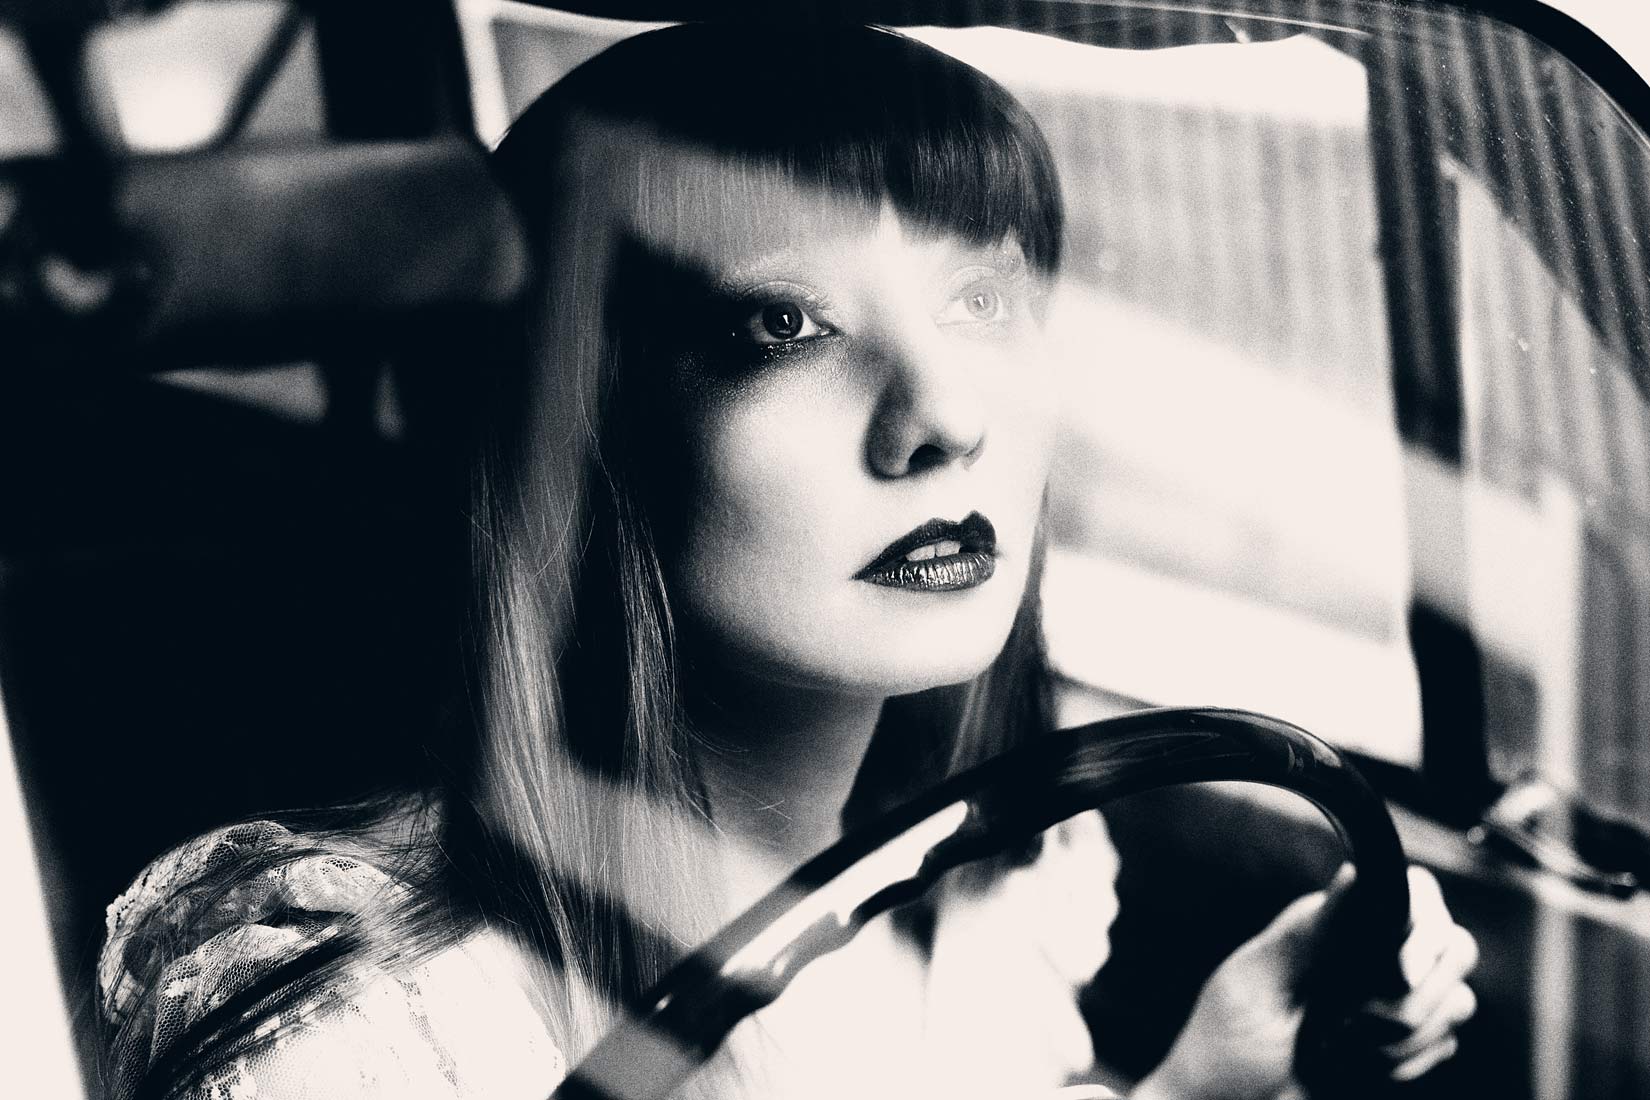 Portrait looking through a windshield of a woman driving in black and white.